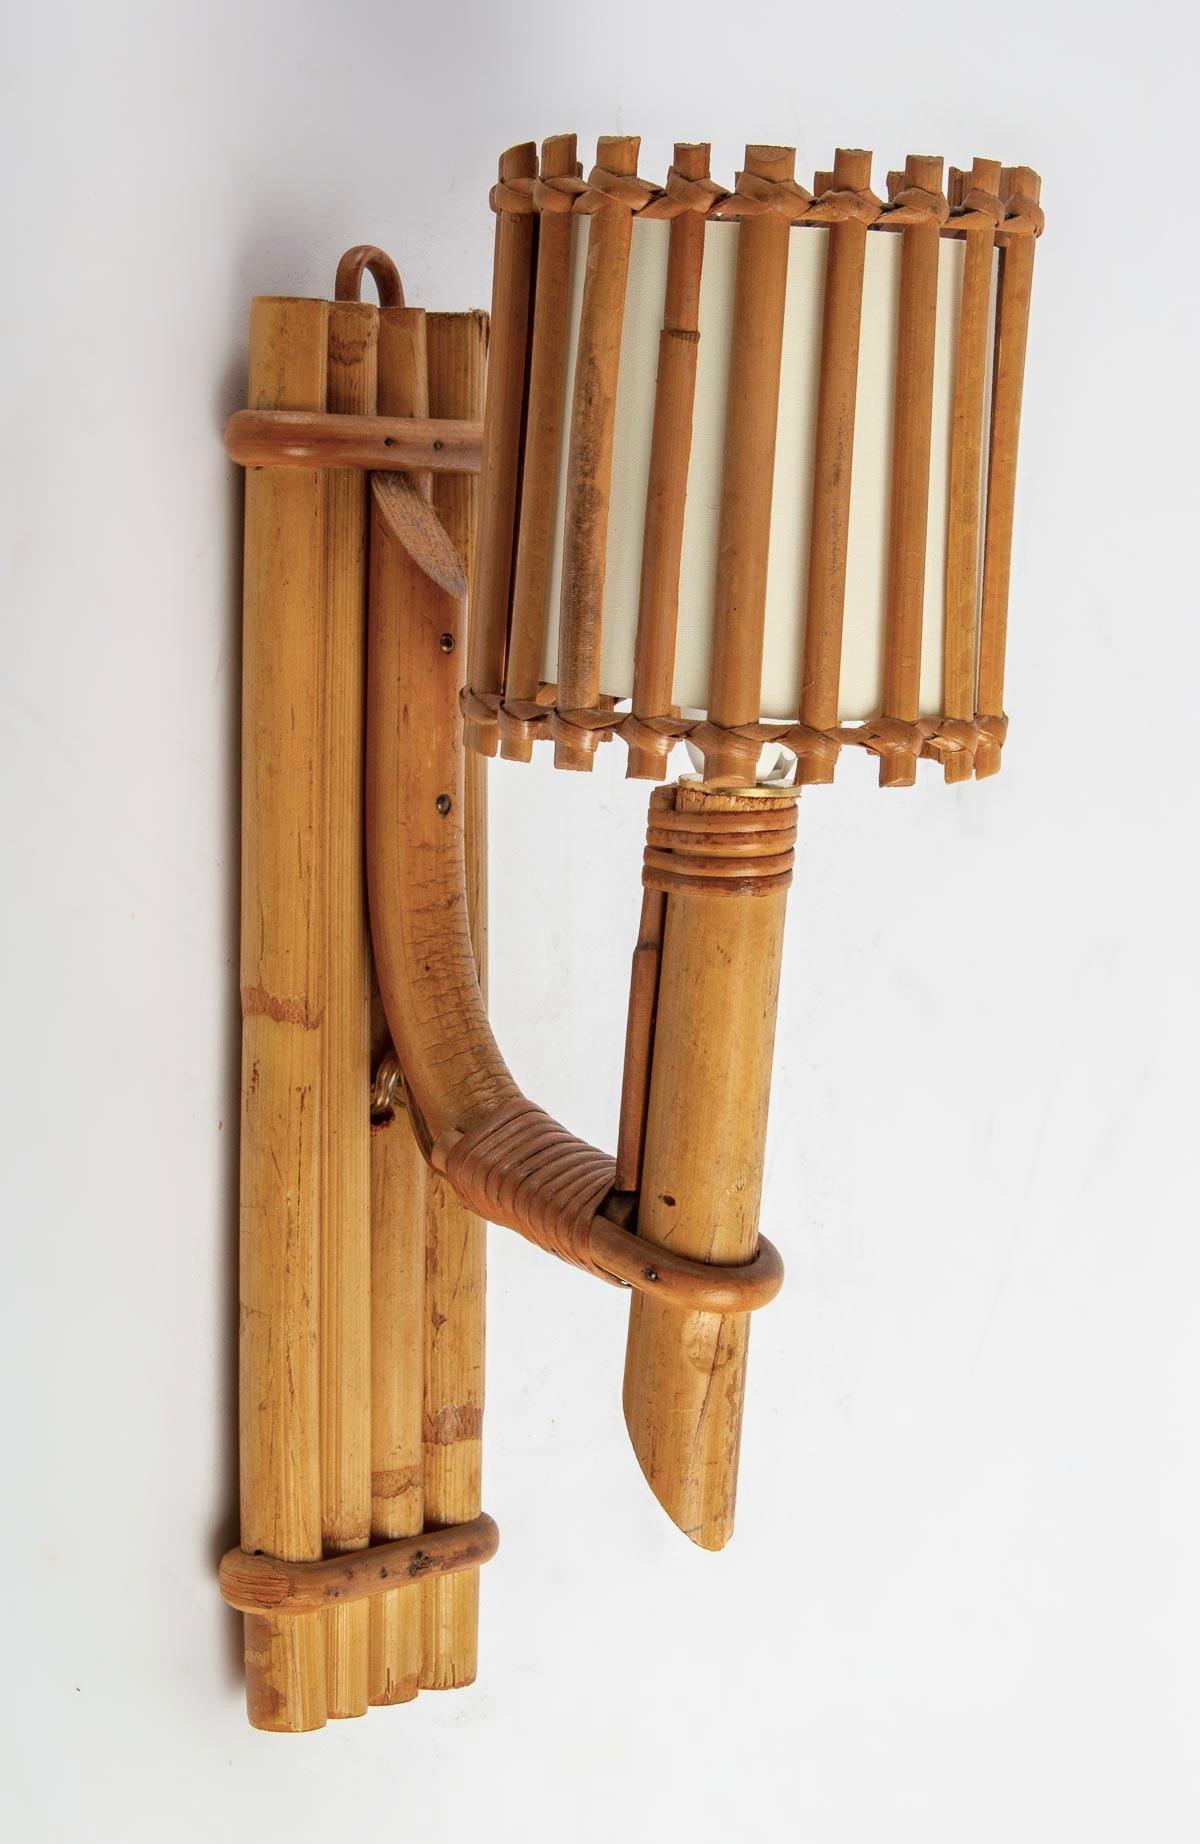 Composed of a wall support formed of several bamboo stalks assembled vertically by links in bamboo thread on which leaves a light arm composed of a descending bamboo stalk on which is positioned another ascending bamboo stalk acting as a light arm.